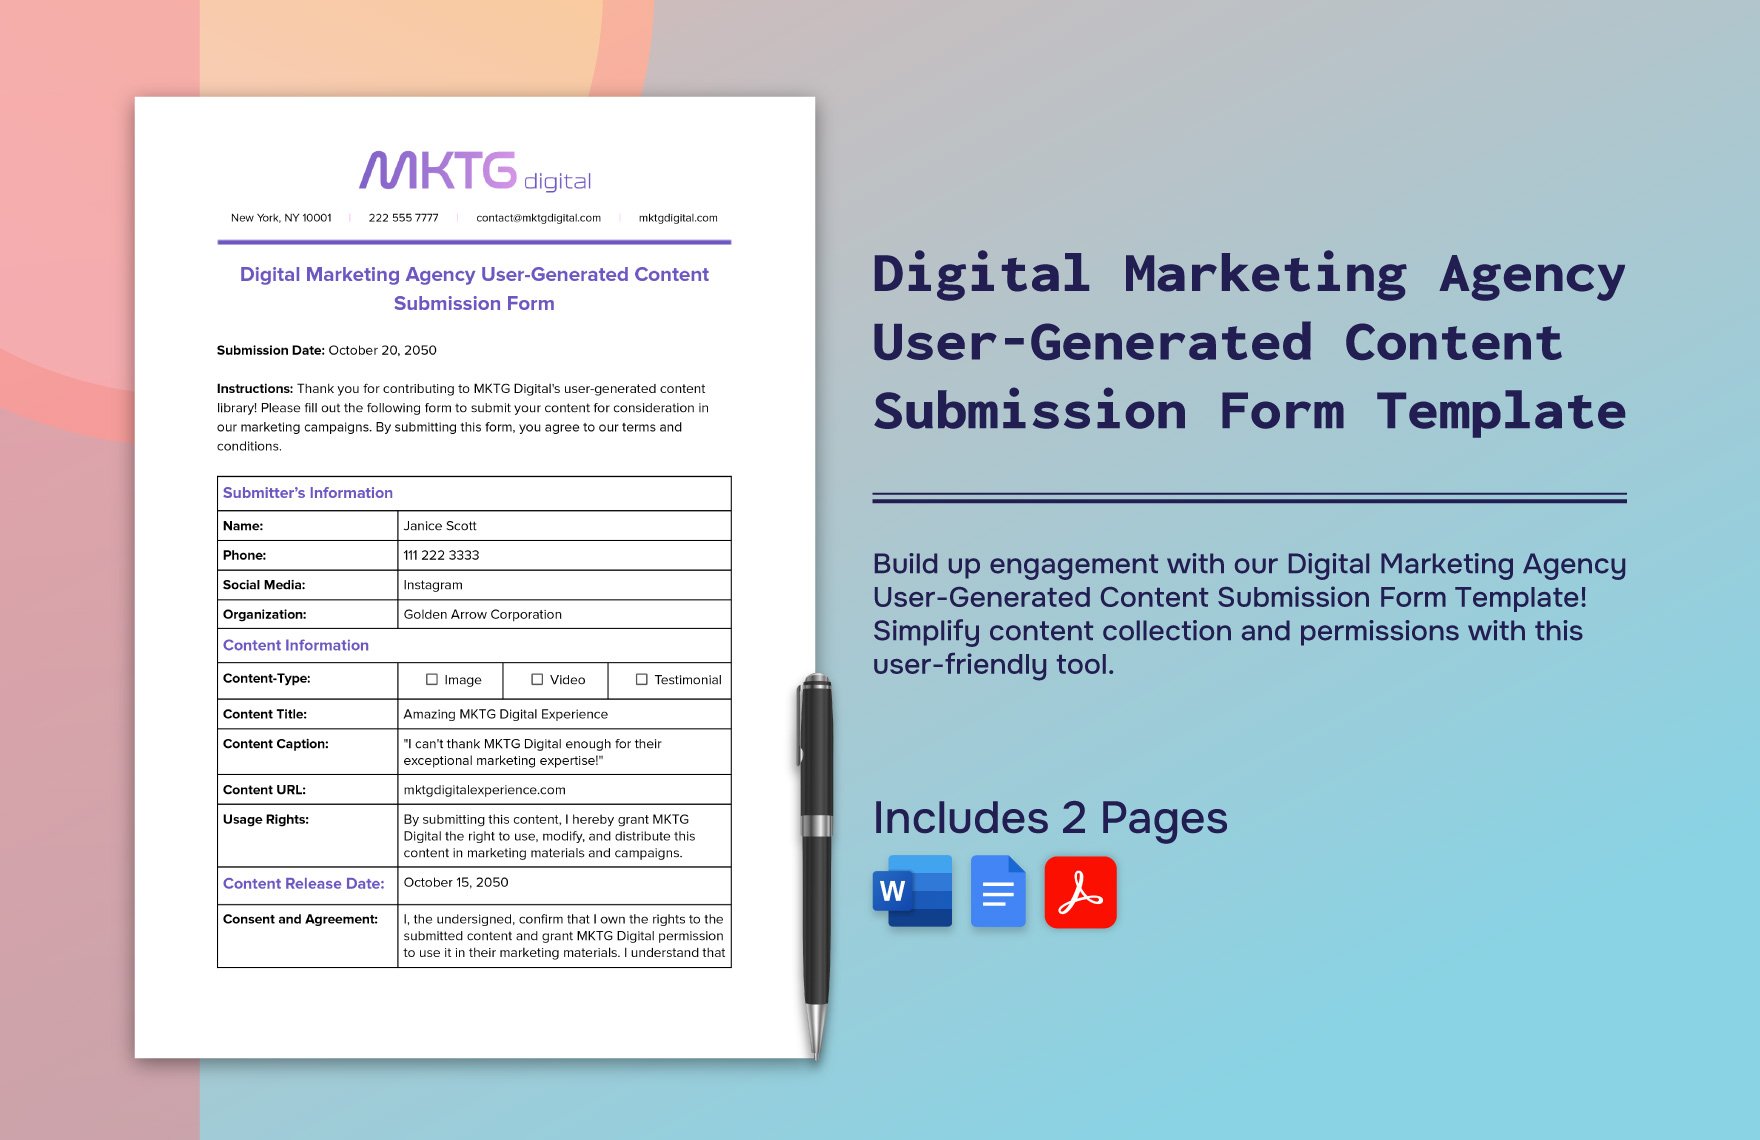 Digital Marketing Agency User-Generated Content Submission Form Template in Word, Google Docs, PDF